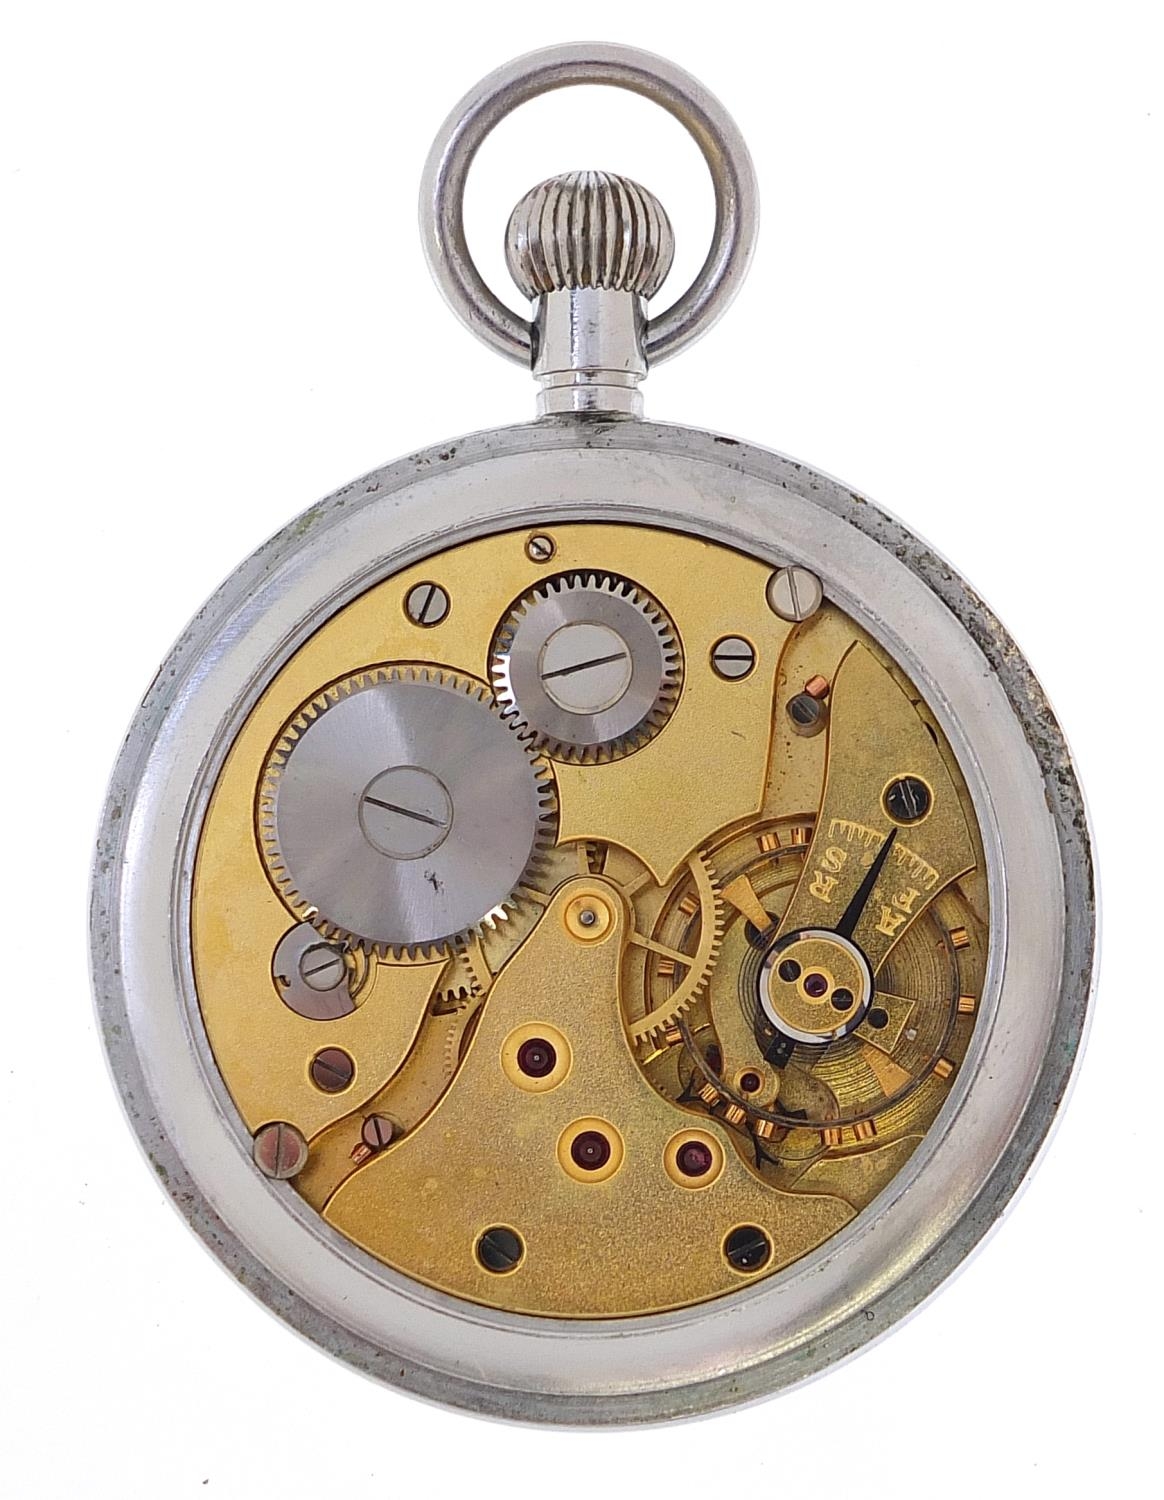 Leonidas, military interest open face pocket watch engraved G.S.T.P.N.8455, 50mm in diameter - Image 3 of 4